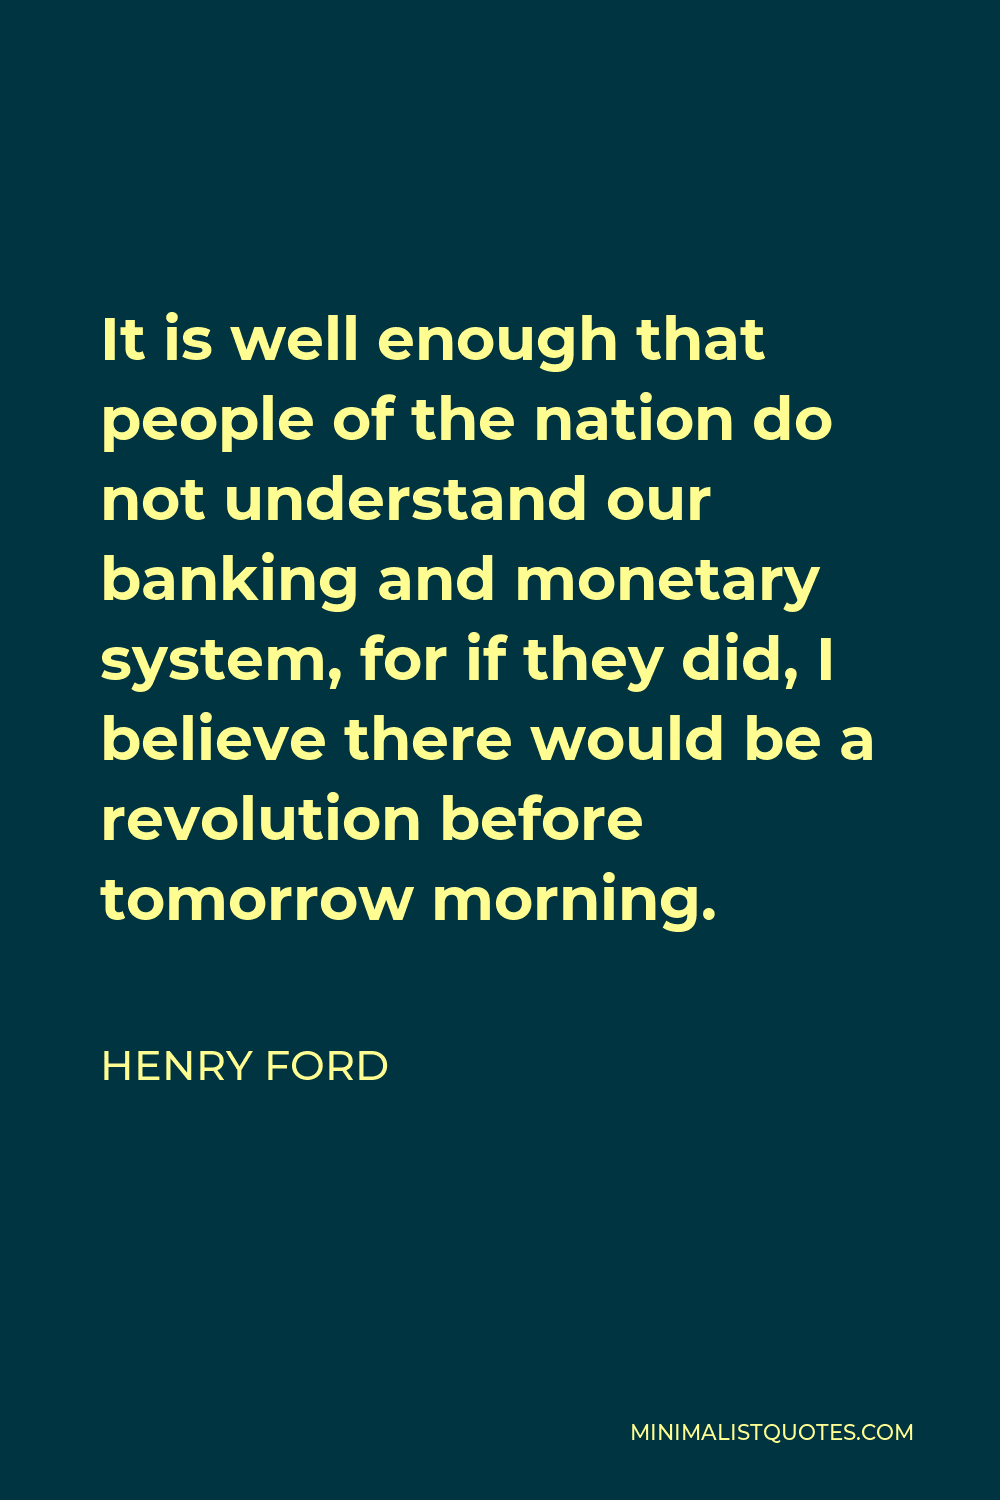 Henry Ford Quote - It is well enough that people of the nation do not understand our banking and monetary system, for if they did, I believe there would be a revolution before tomorrow morning.